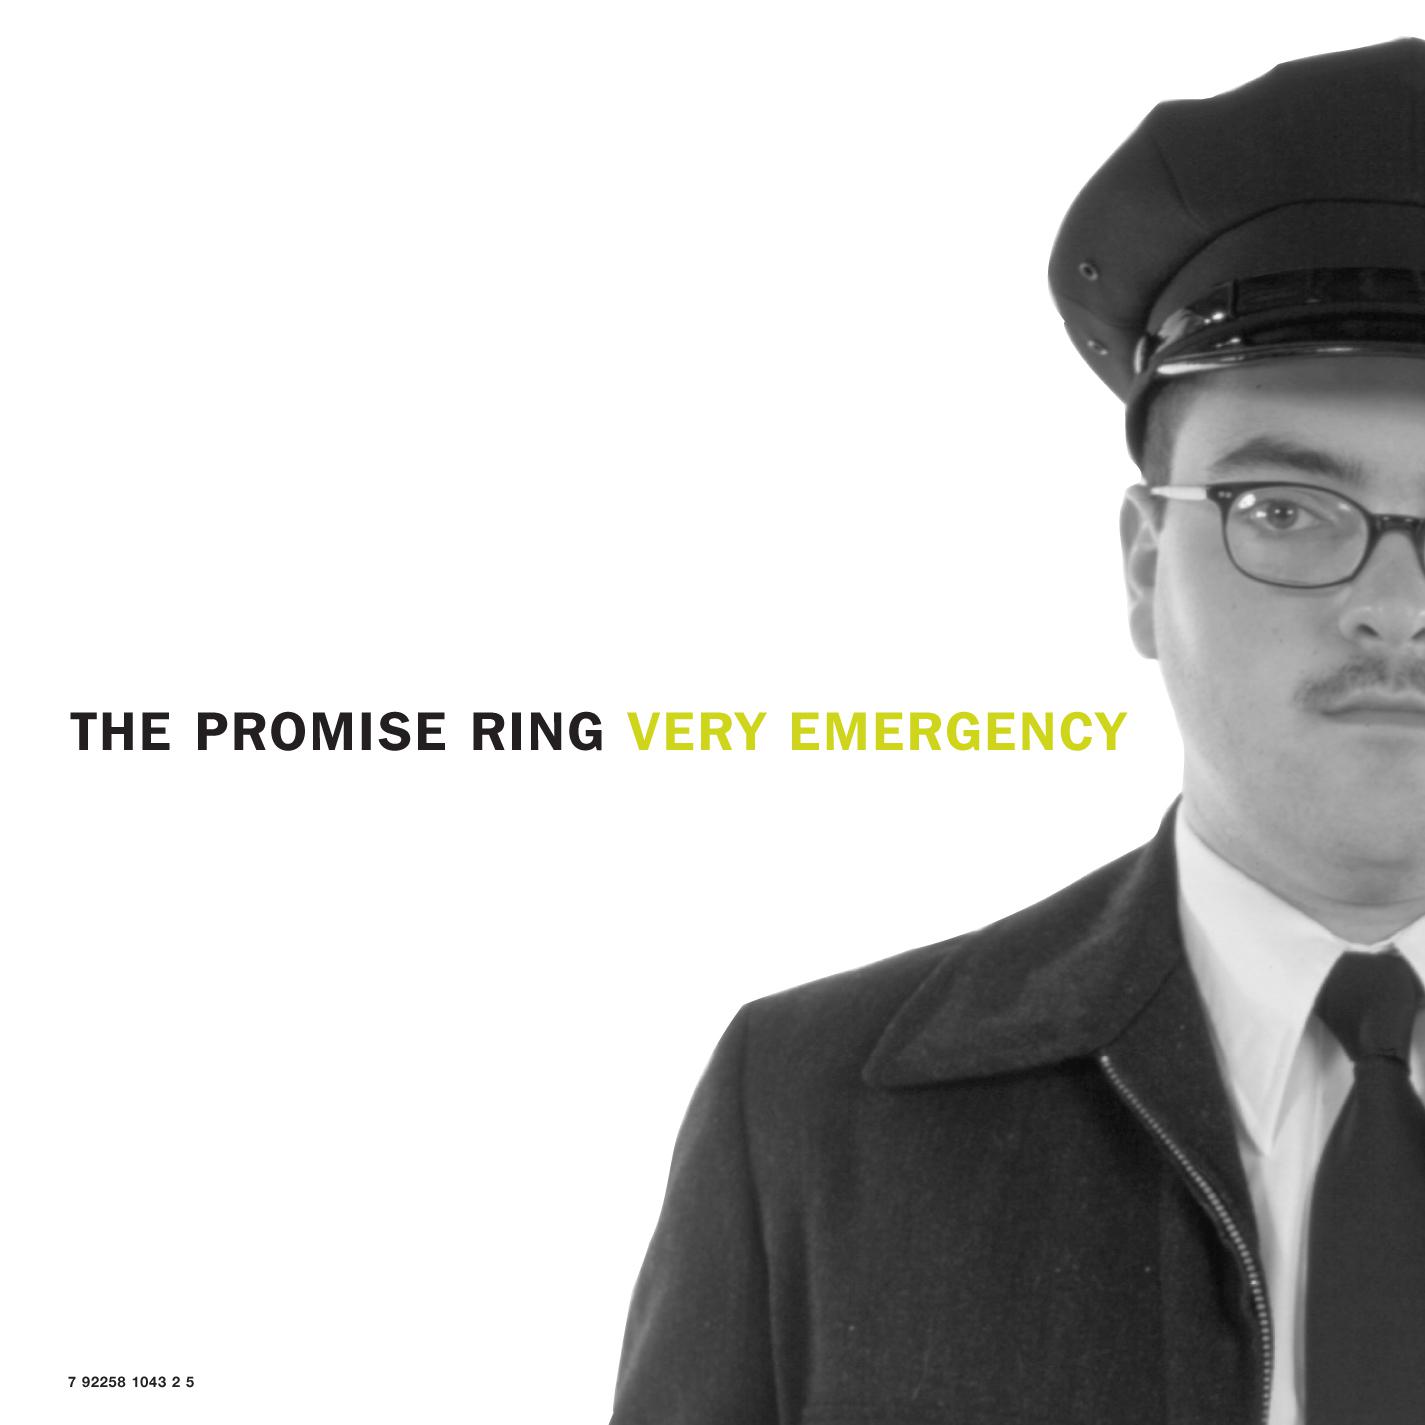 The Promise Ring - Emergency! Emergency!